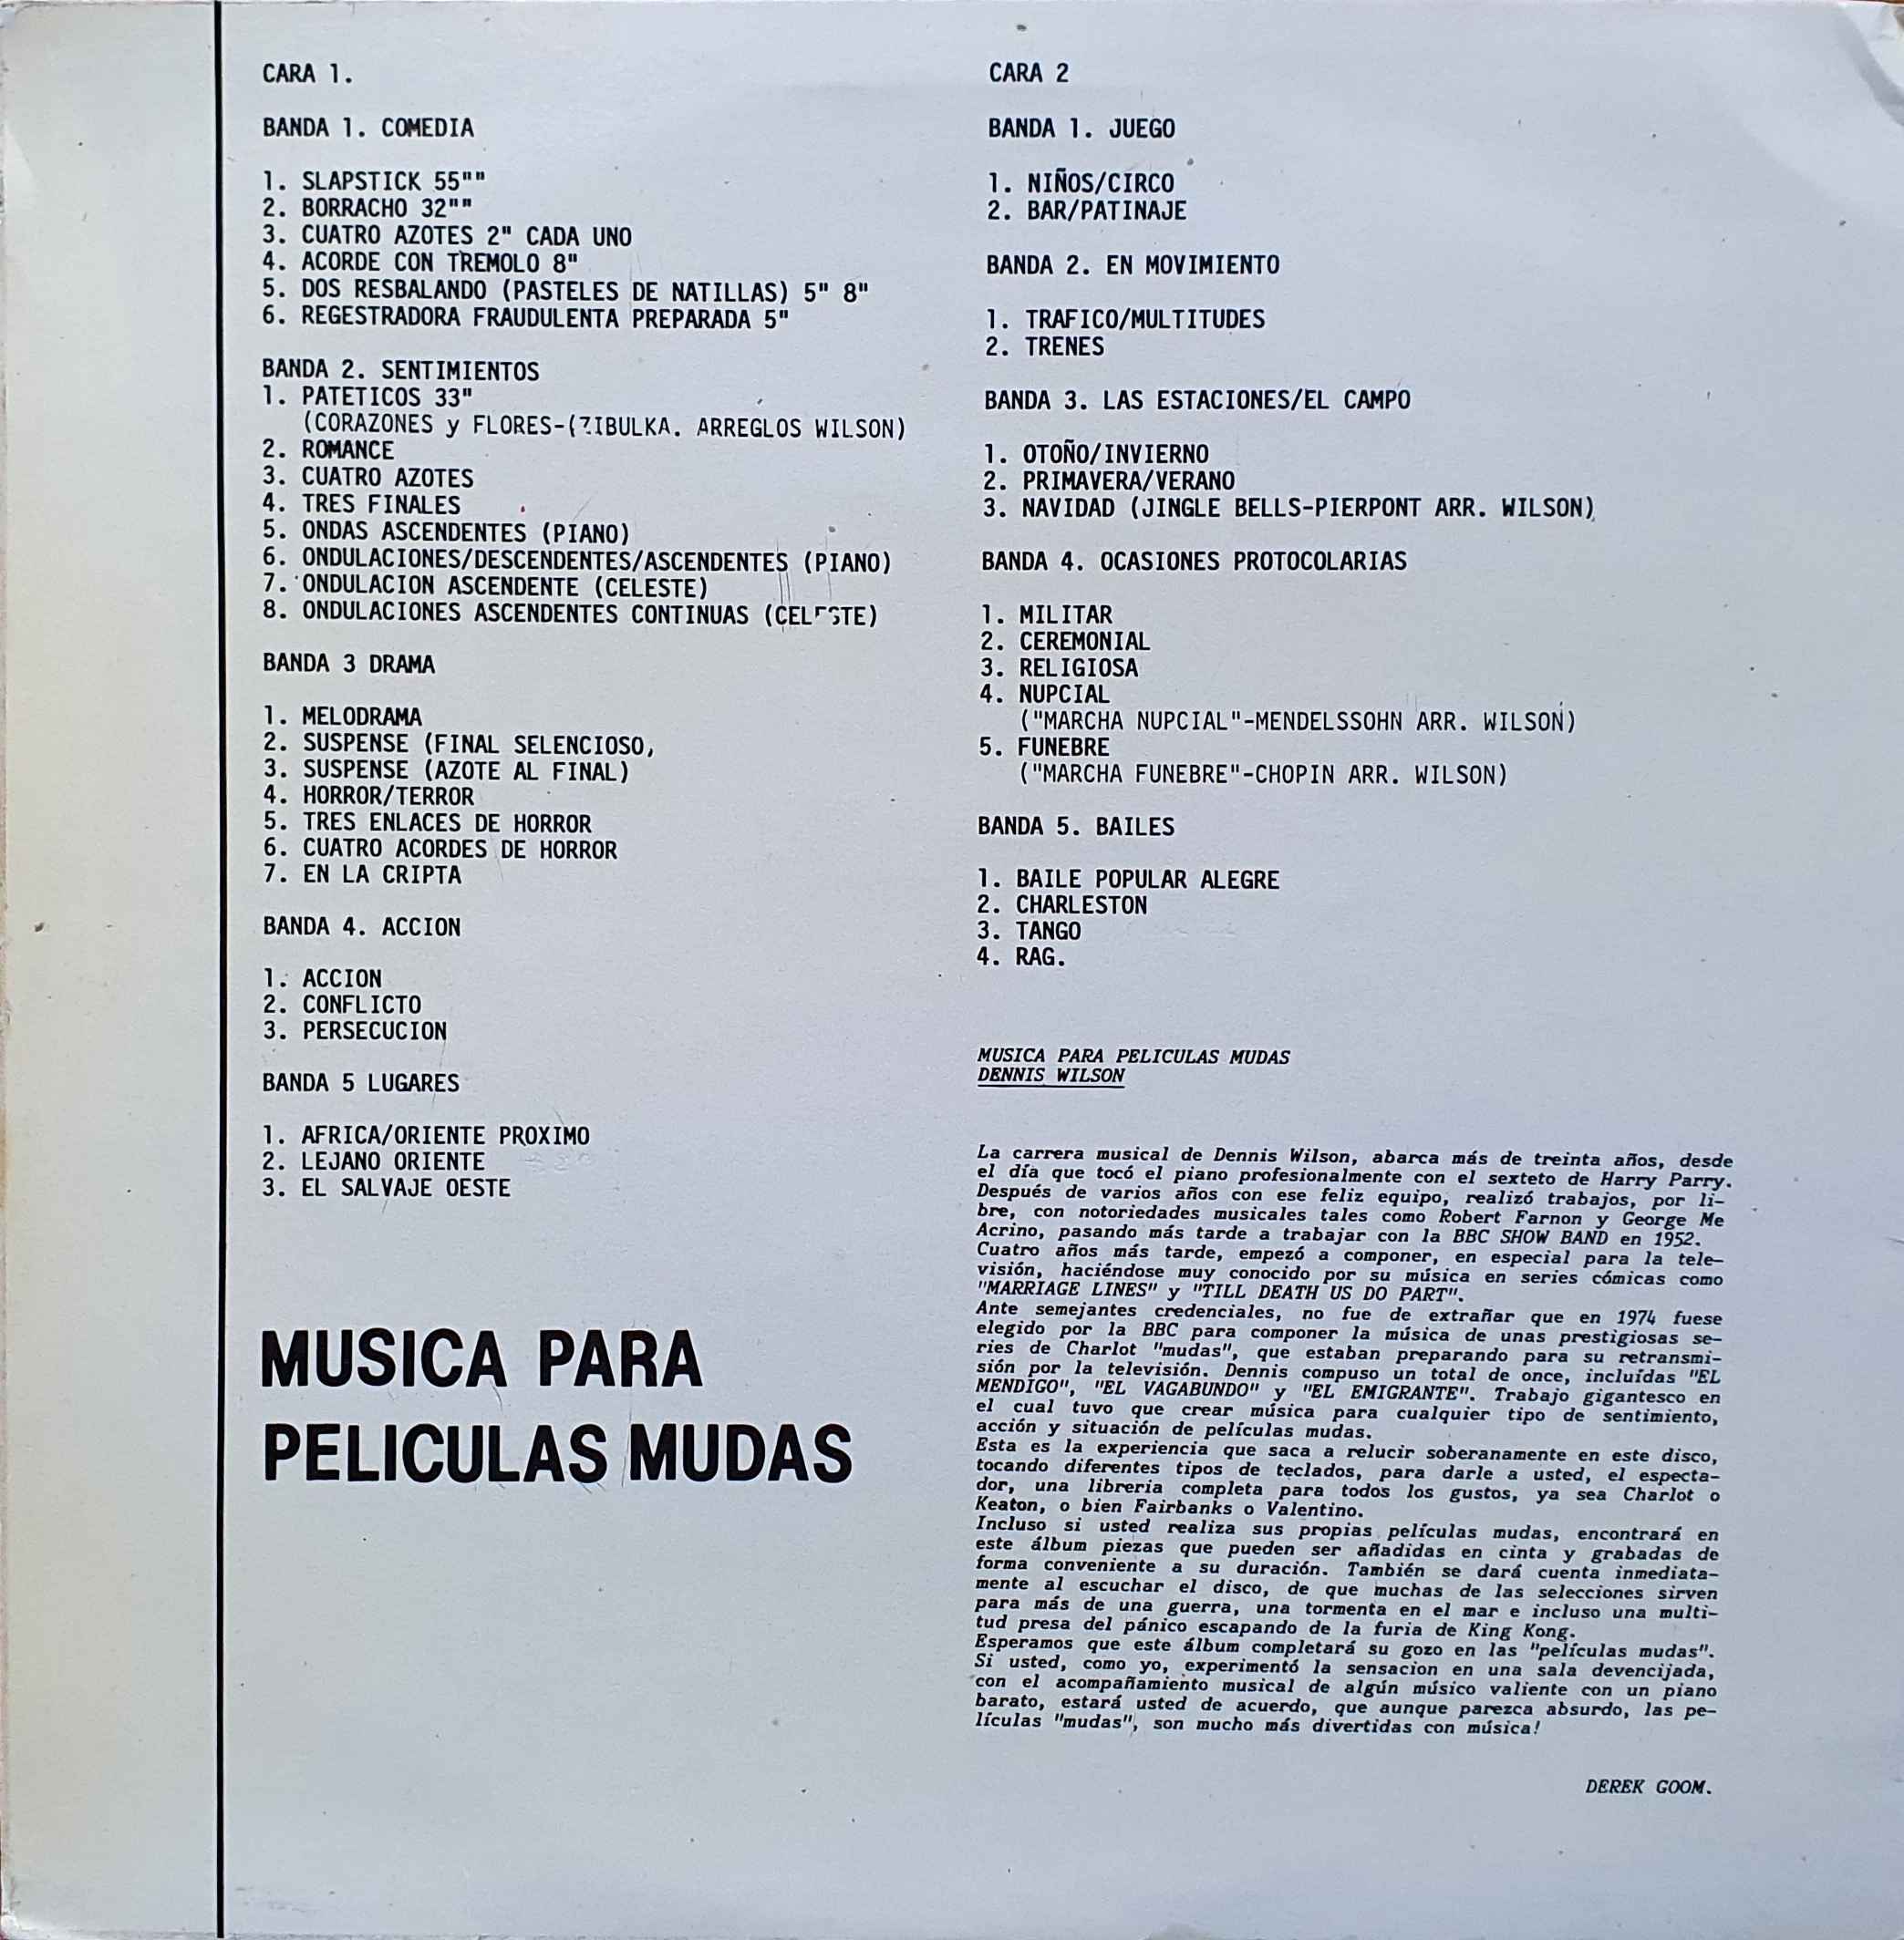 Picture of 51.0126 Efectos de sonido - Musica Para Peliculas Mudas by artist Various from the BBC records and Tapes library